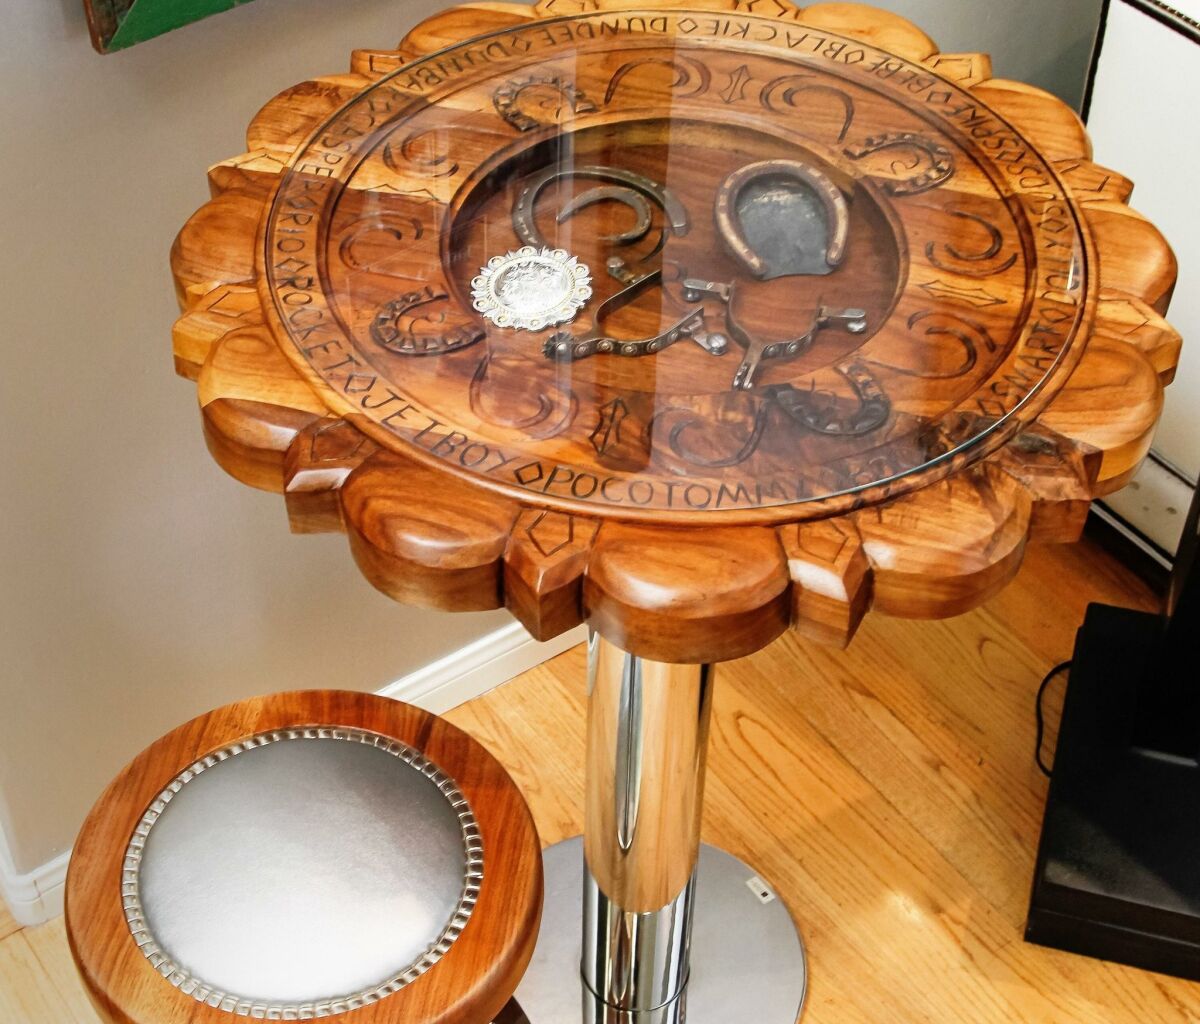 Holmquist’s Concho hand-carved table and stool displays names of horses the family has owned. — Eduardo Contreras